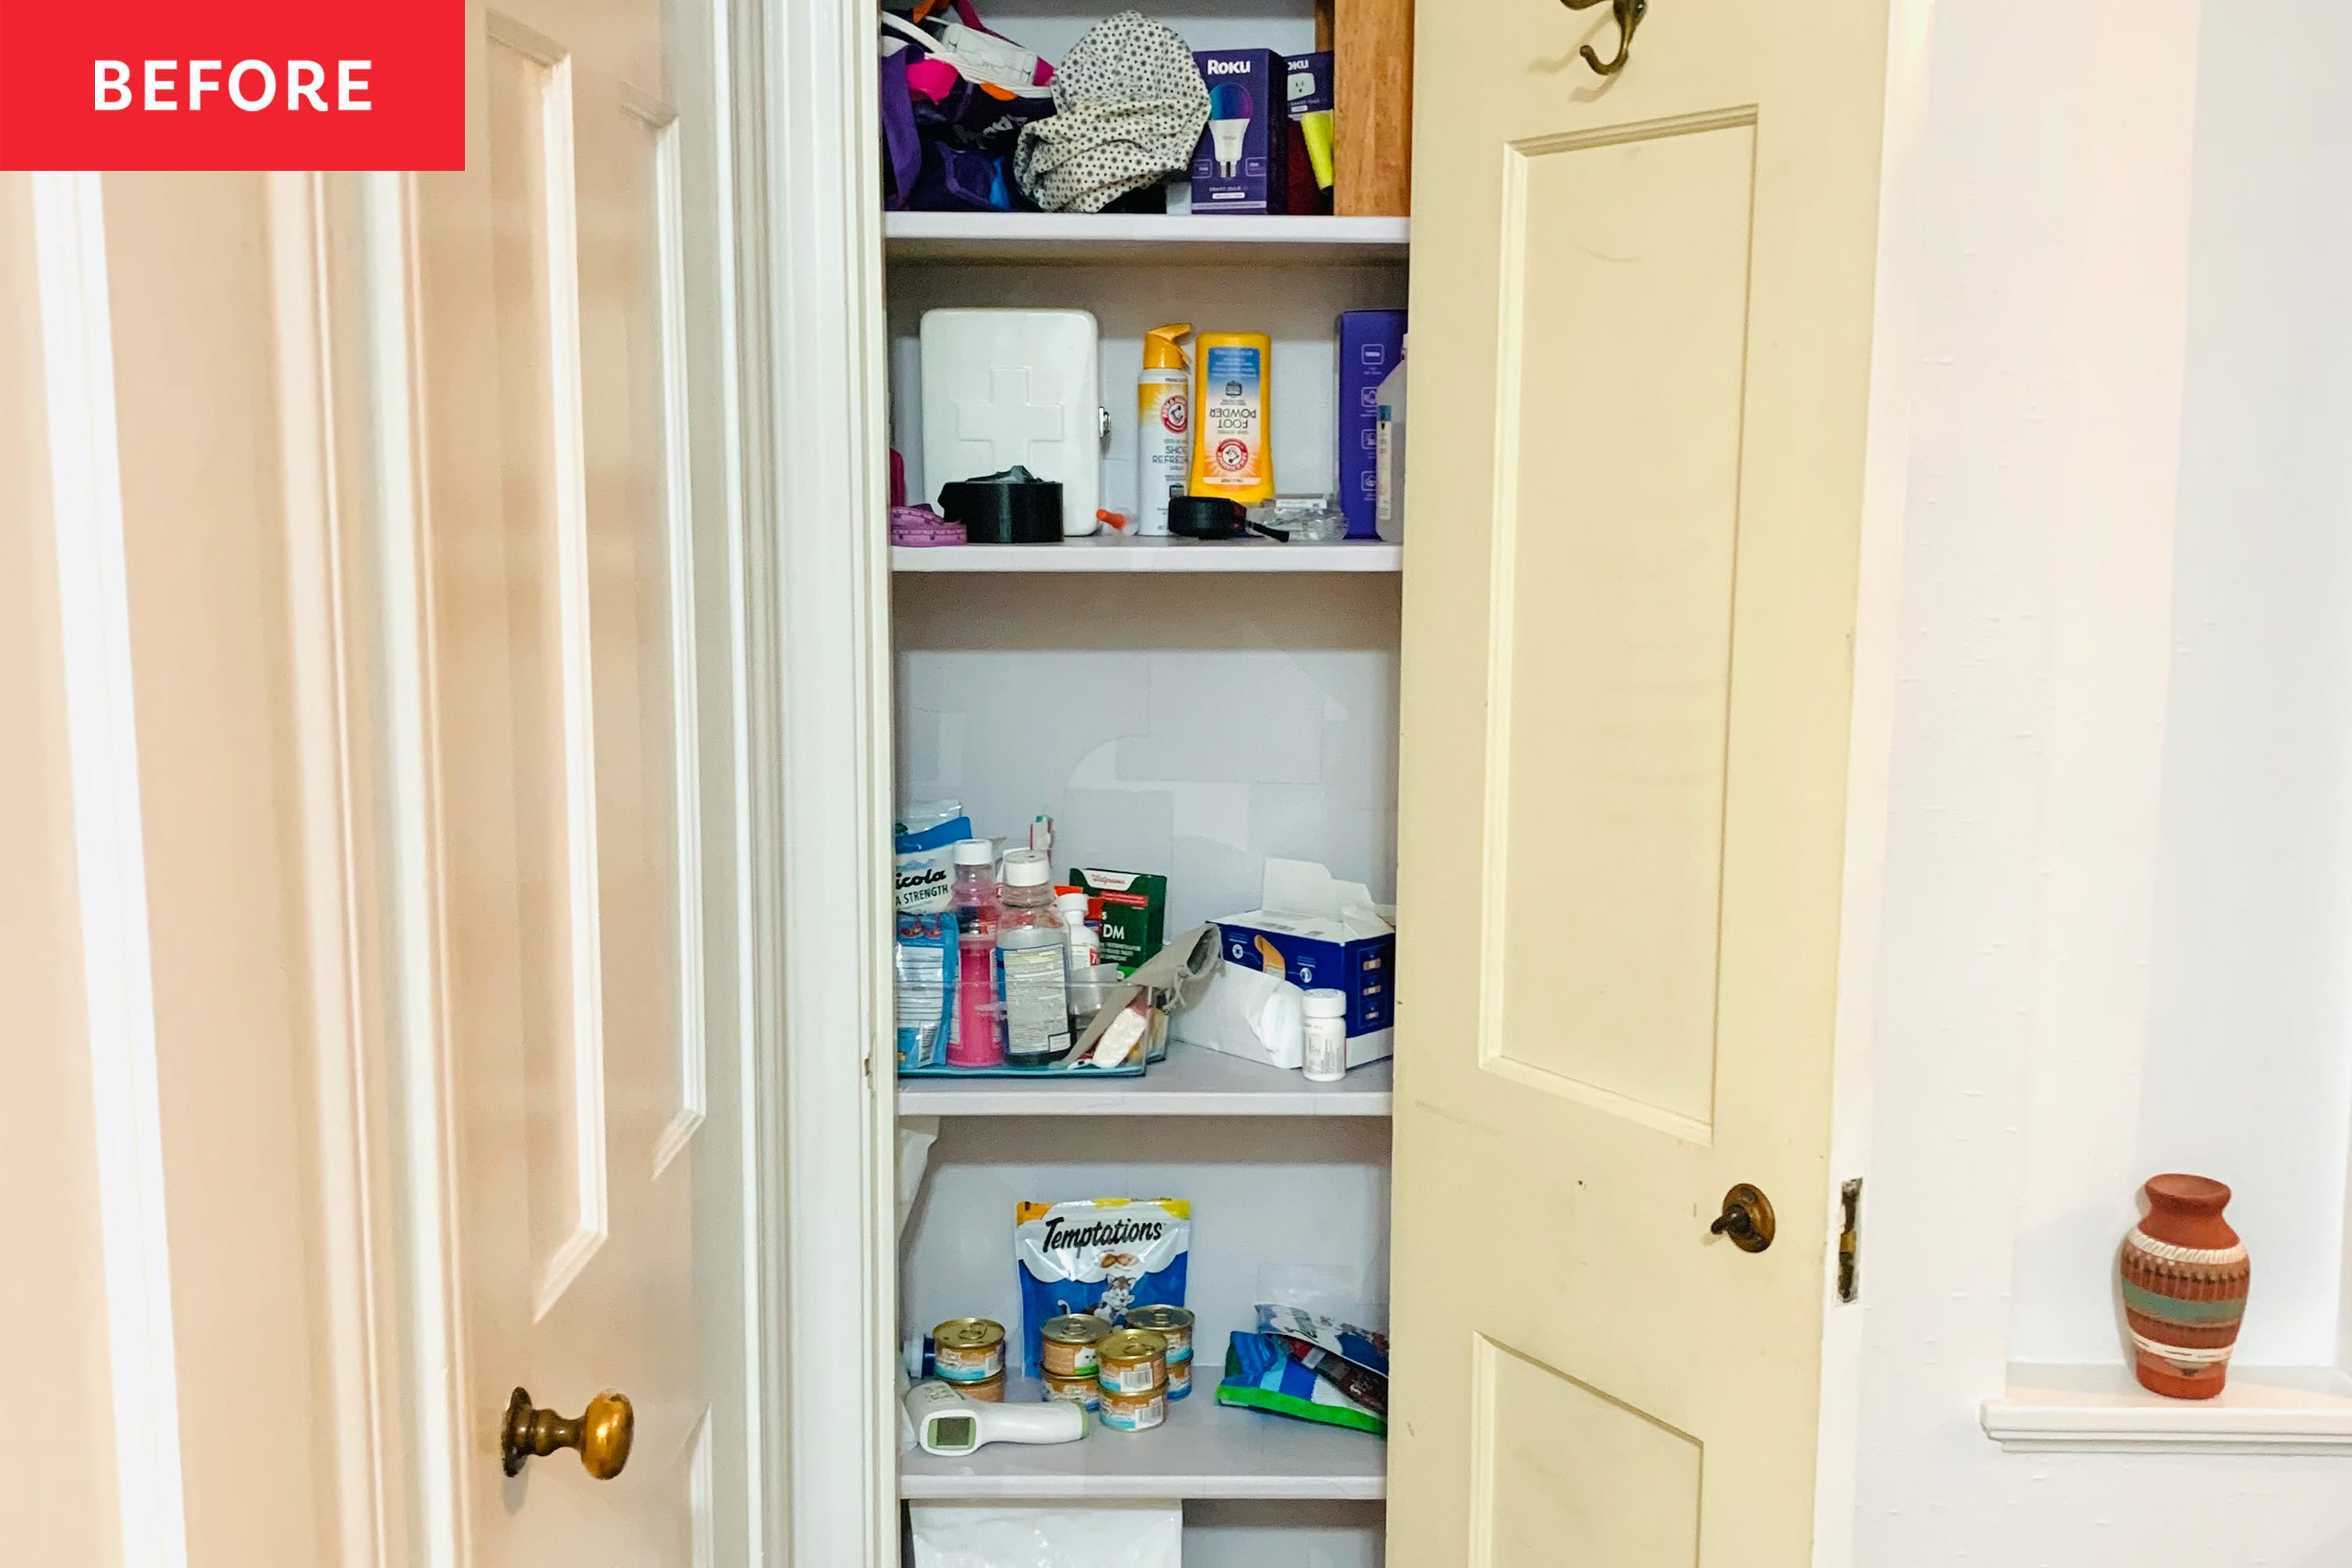 https://cdn.apartmenttherapy.info/image/upload/v1685640821/at/organize-clean/before-after/pro-organizer-hallway-closet/hallway-closet-before-1-lead-tag.jpg